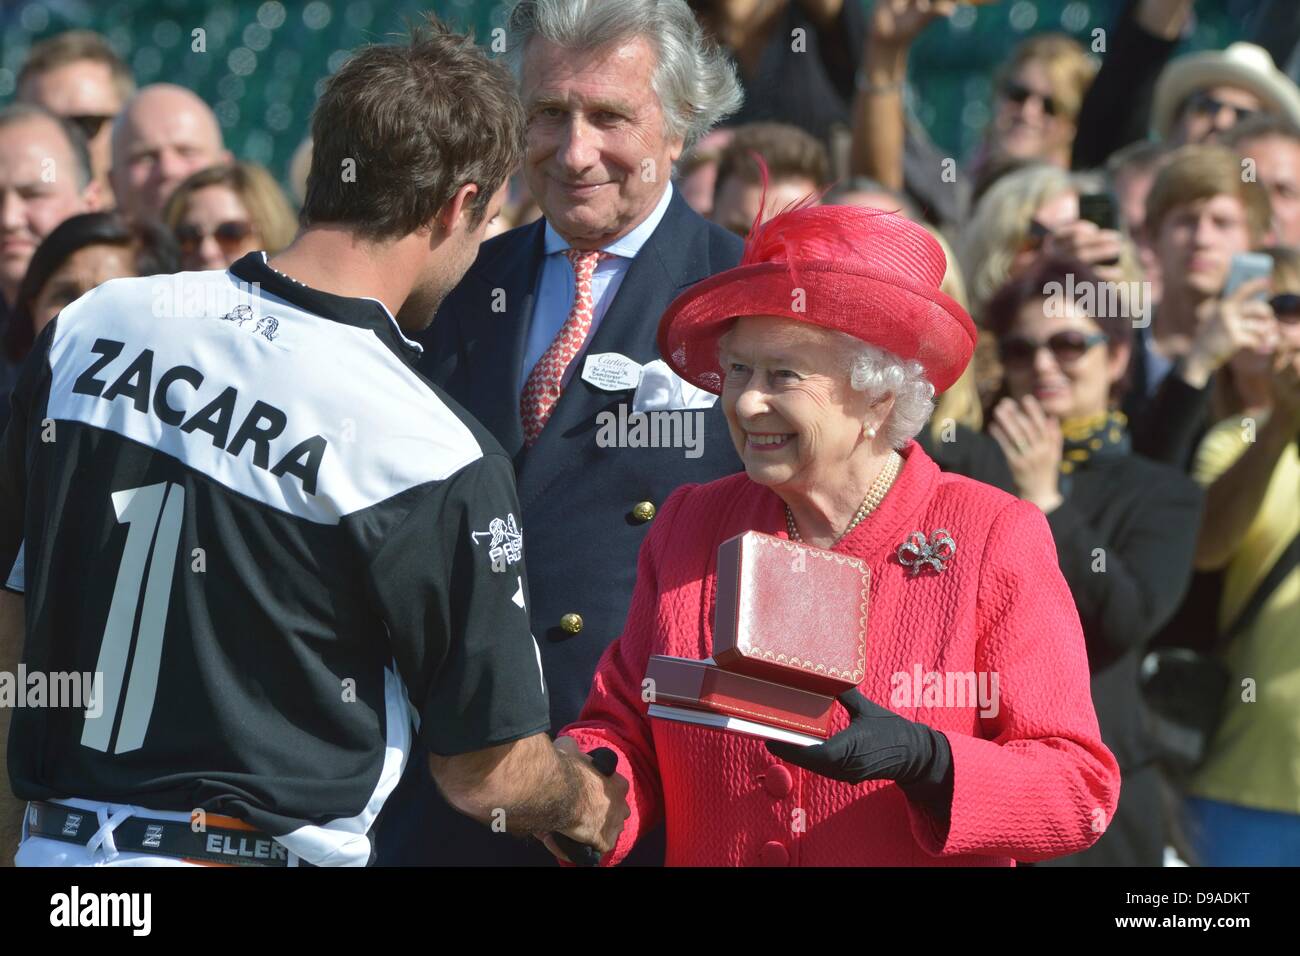 Windsor, UK. 16th June, 2013. Her Majesty The Queen presents the The Cartier Queen's Cup to Facundo Pieres [1] of team Zacara.  Zacara beat El Remanso in the Final 15-9.  The Cartier Queen's Cup was played at Guards Polo Club Smiths Lawn Windsor Great Park on Sunday 16th June. Credit: Stephen Bartholomew/Stephen Bartholomew Photography/Alamy Live News Stock Photo